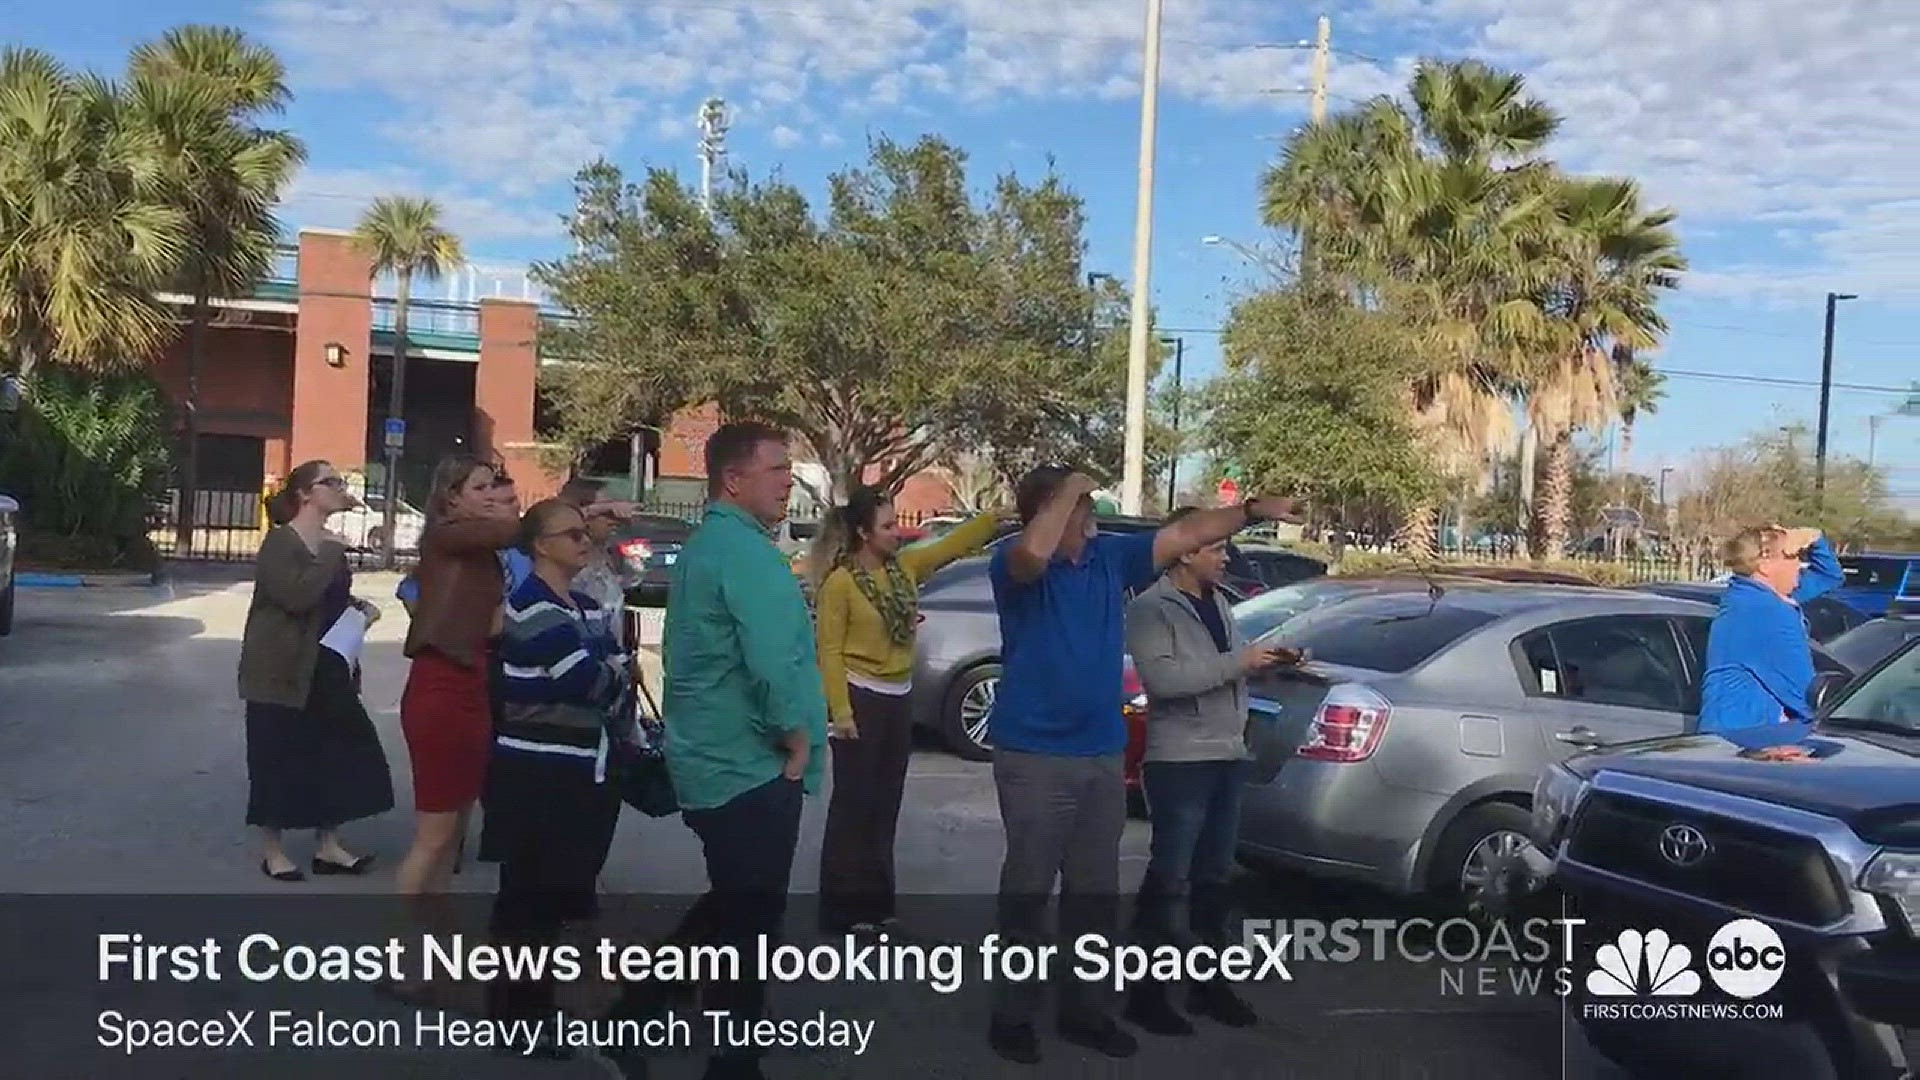 The team at First Coast News took a break from reporting news Tuesday to watch the news and history being made with the launch of SpaceX Falcon Heavy.